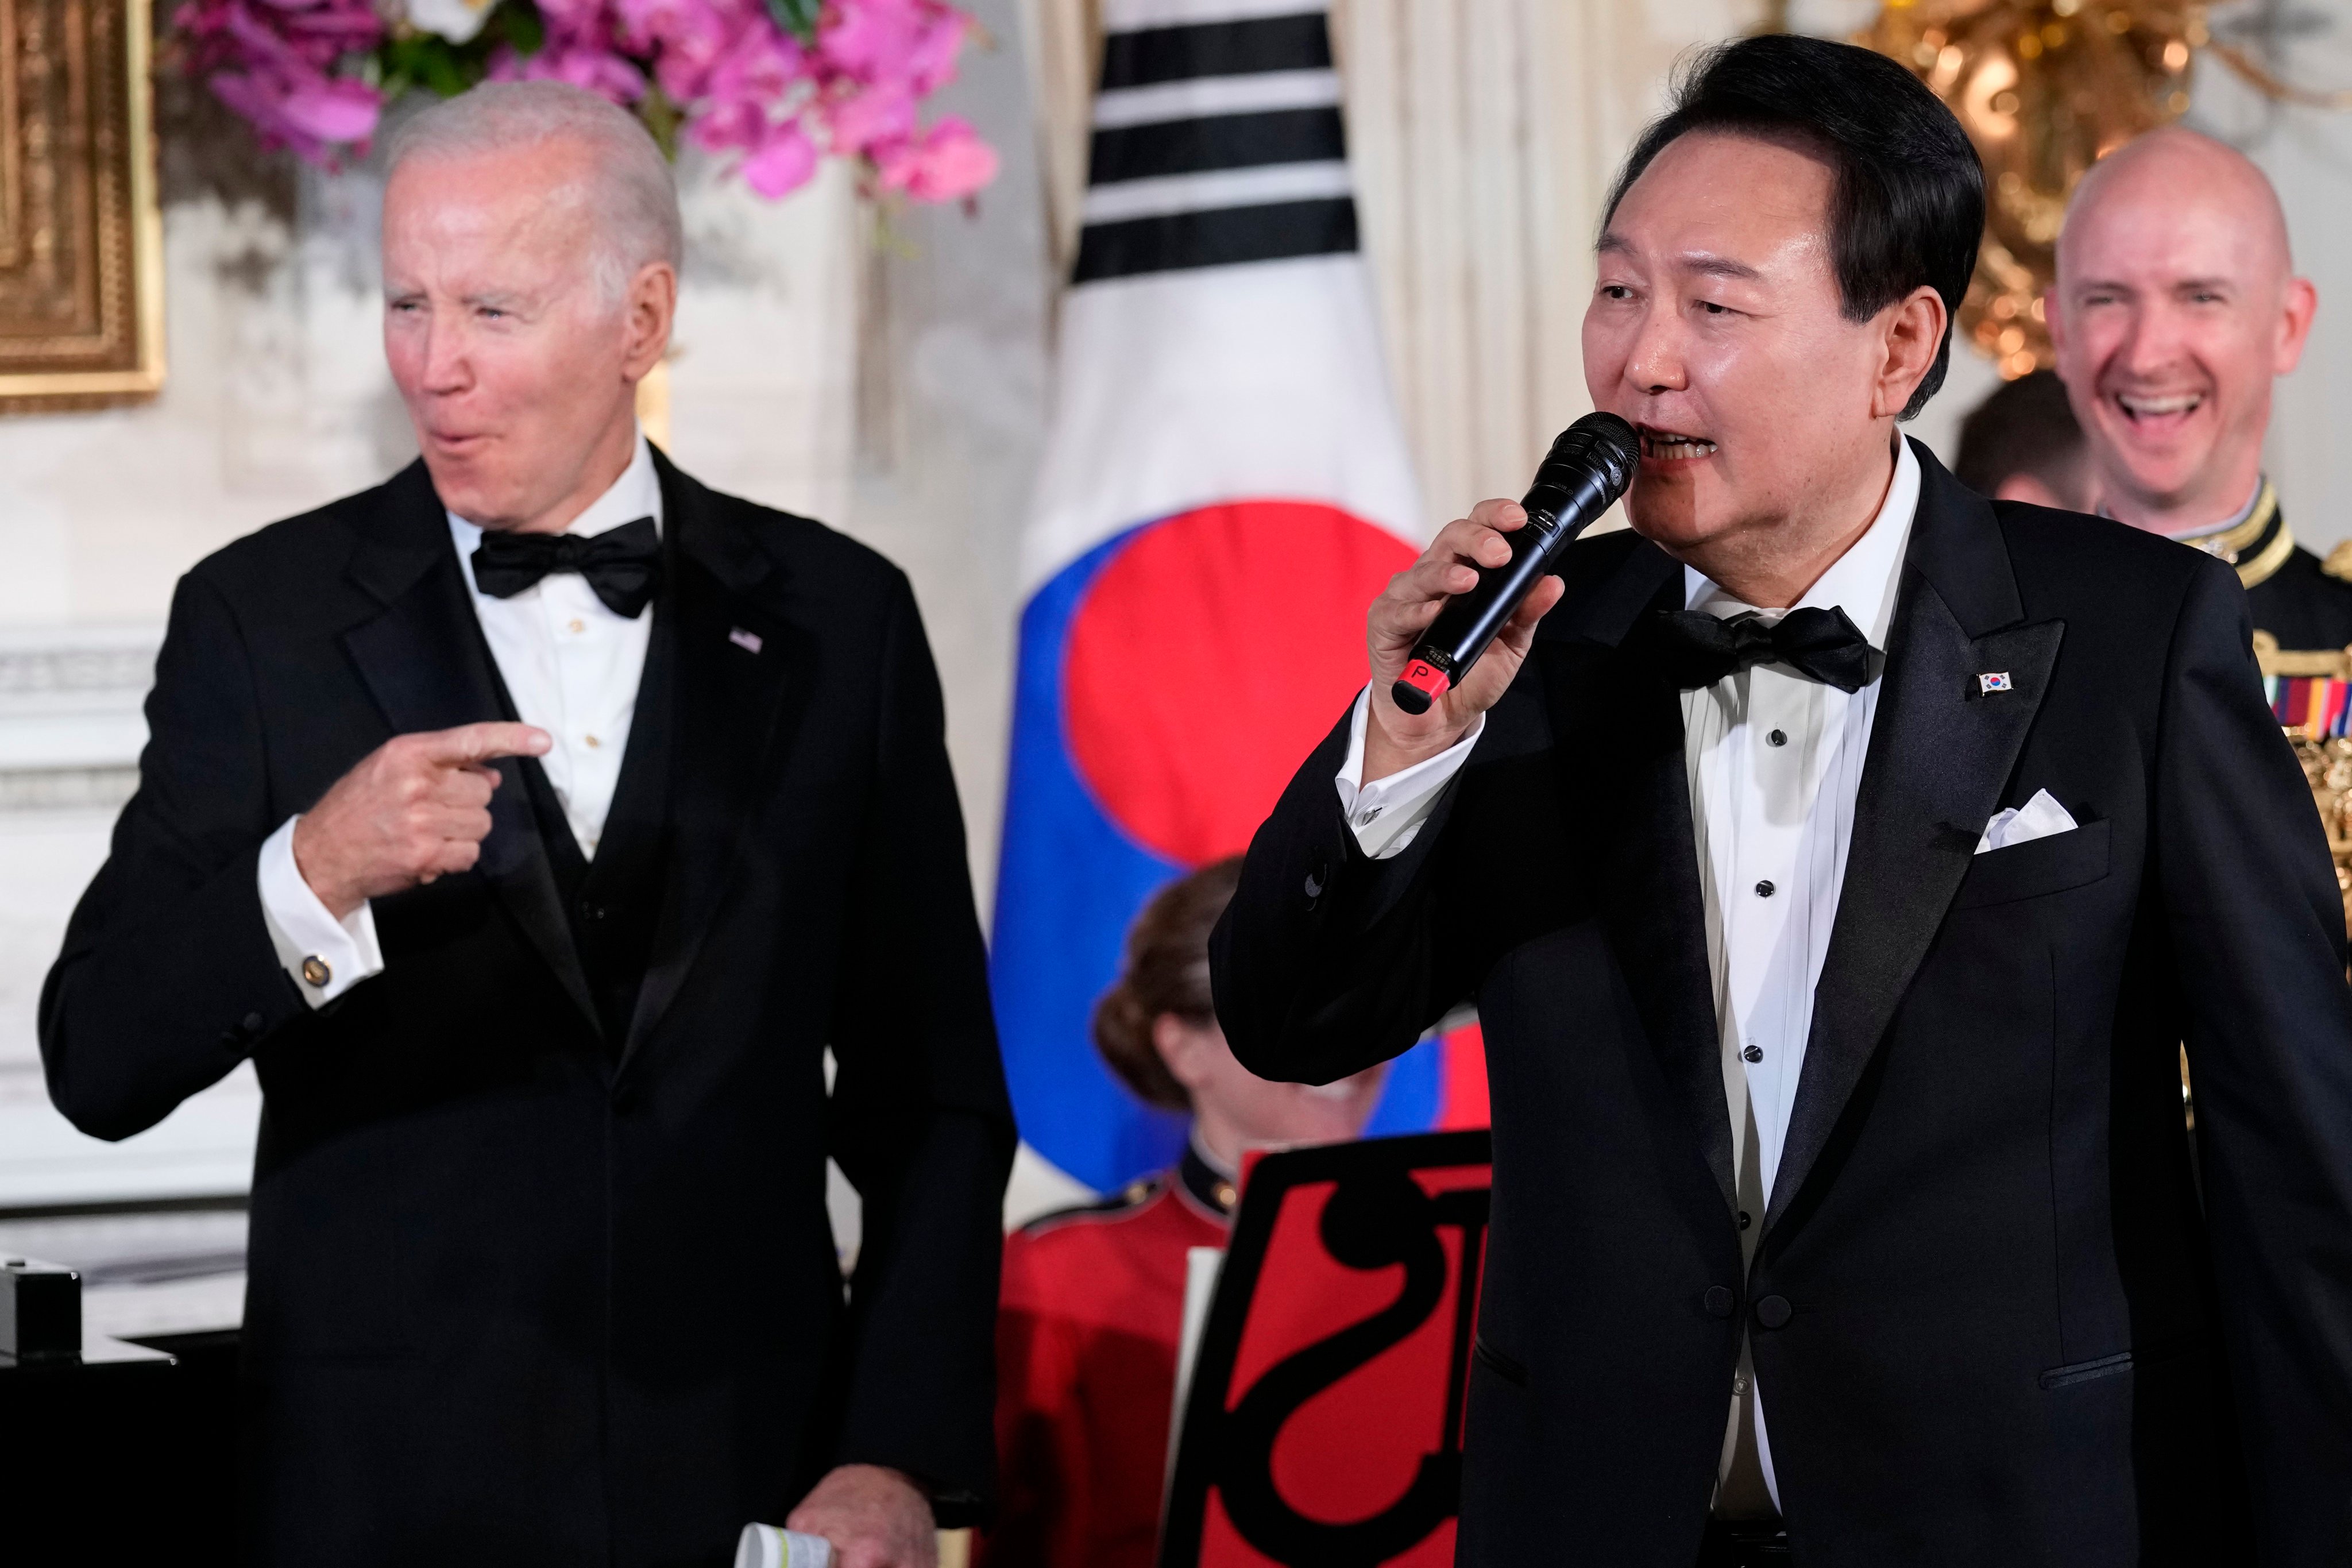 President Joe Biden reacts as South Korea’s President Yoon Suk Yeol sings American Pie in the State Dining Room of the White House in Washington on April 26. Washington and Seoul continue to play lip service to their interest in dialogue with Pyongyang. Photo: AP